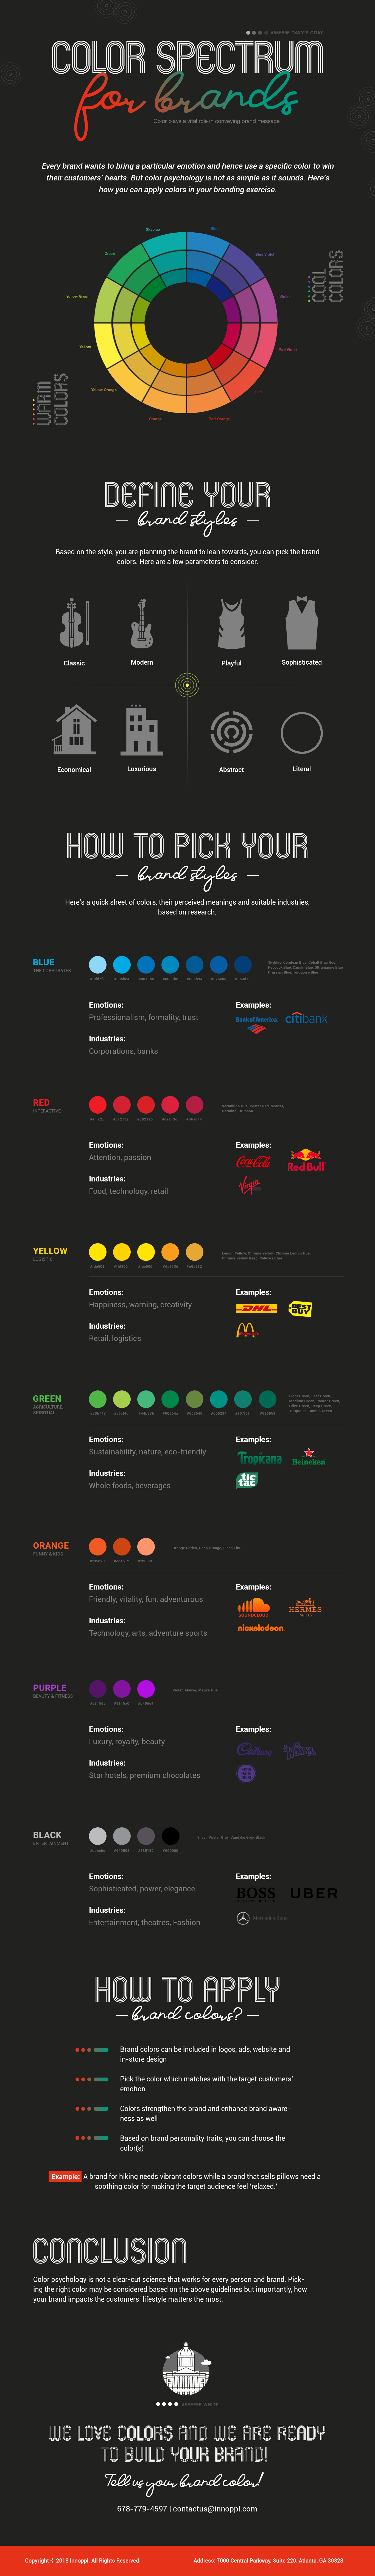 Color spectrum for brands and web designs